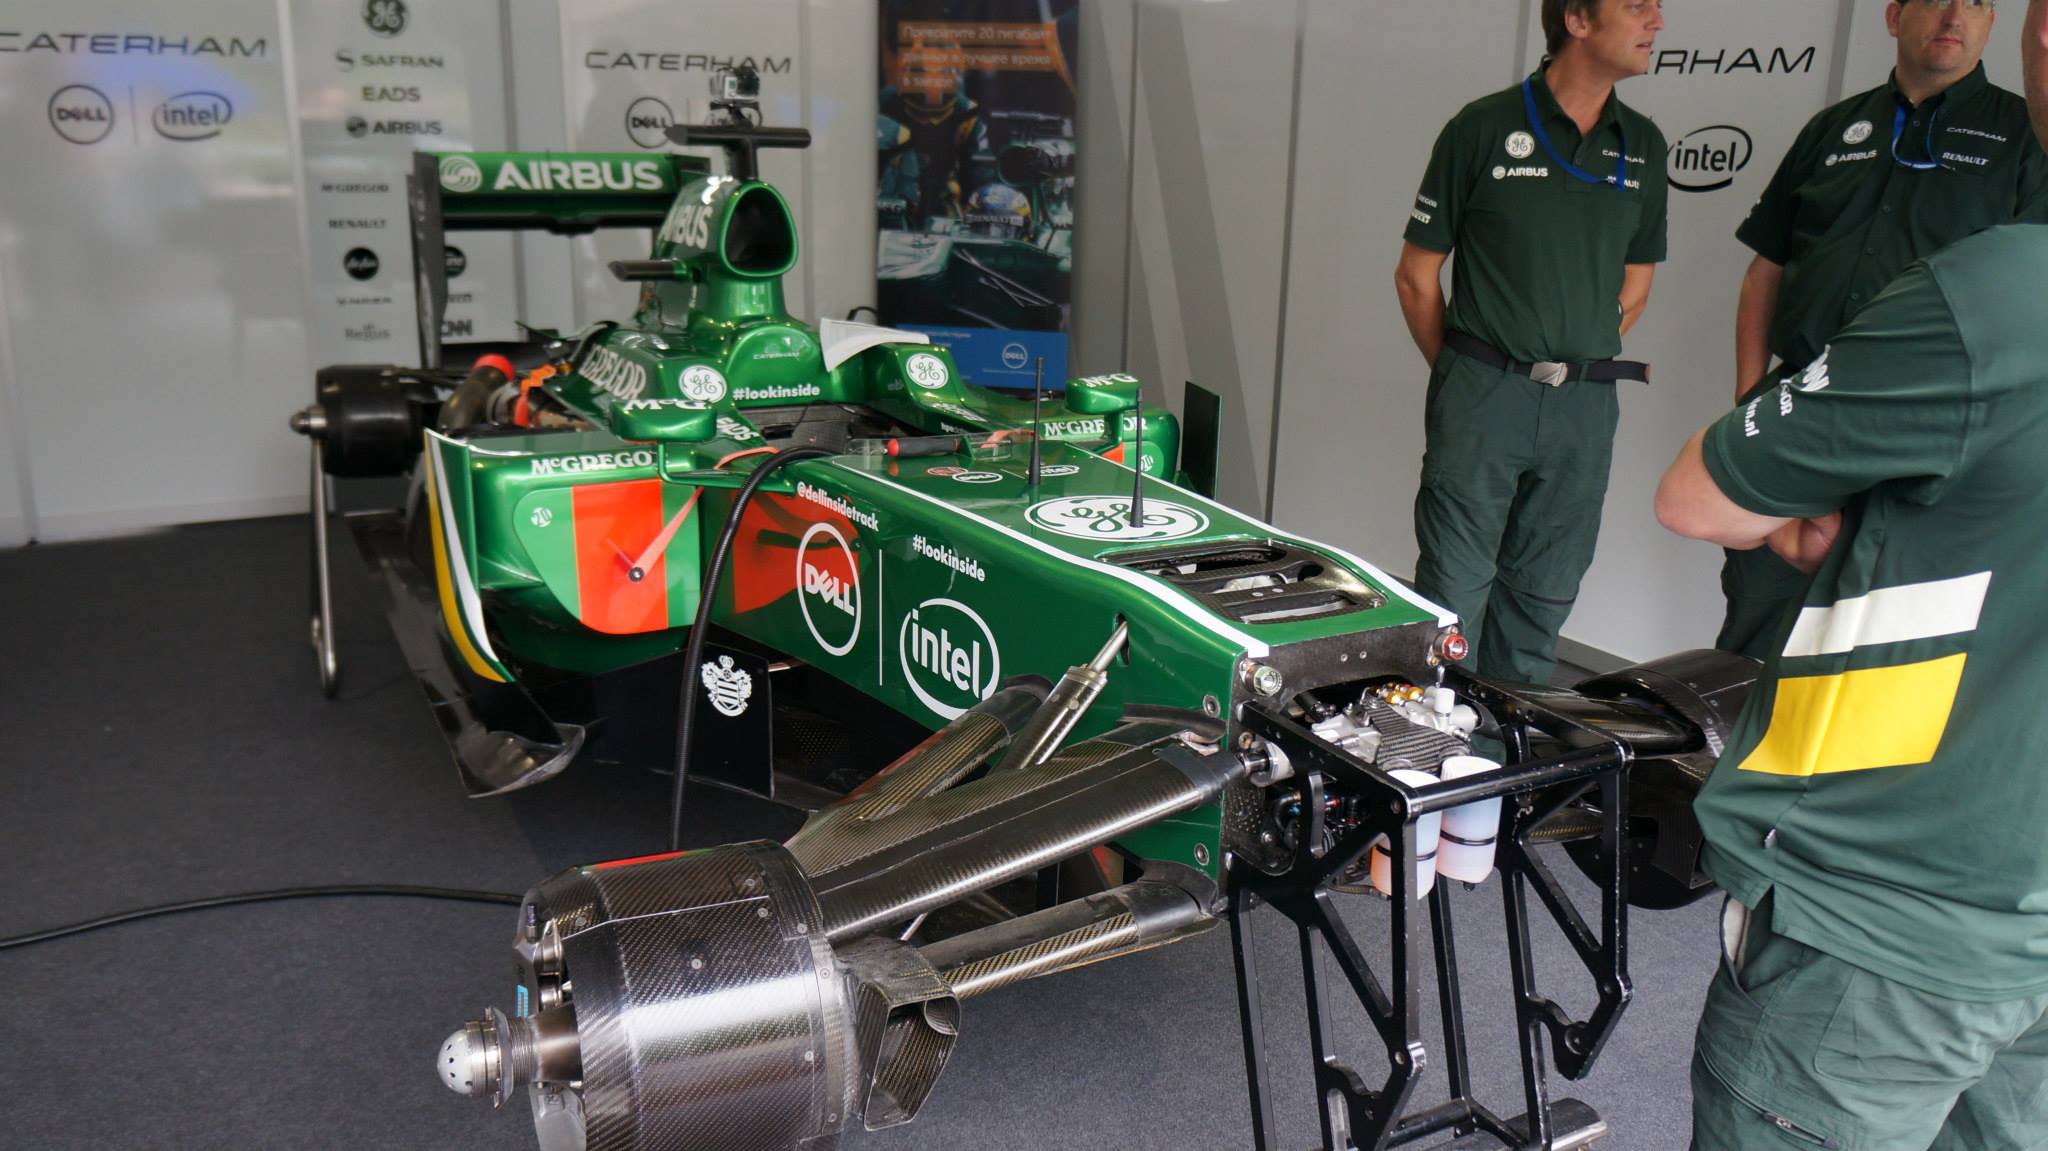 Caterham F1 Team & Dell @ Moscow City Racing 2013